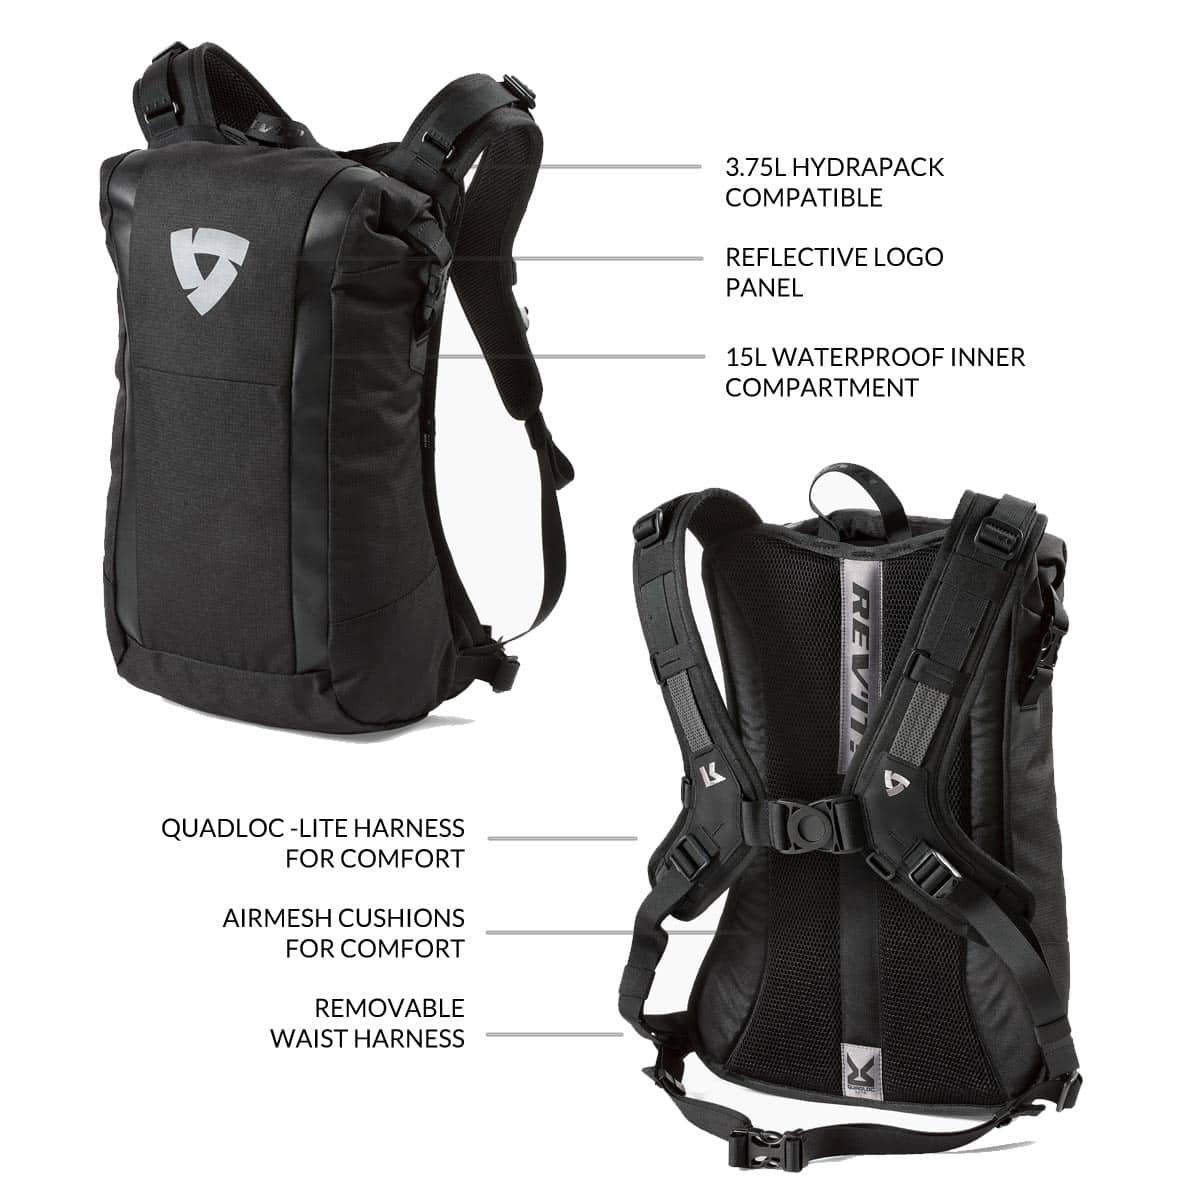 Rev It Stack H2O 15L waterproof backpack - Features